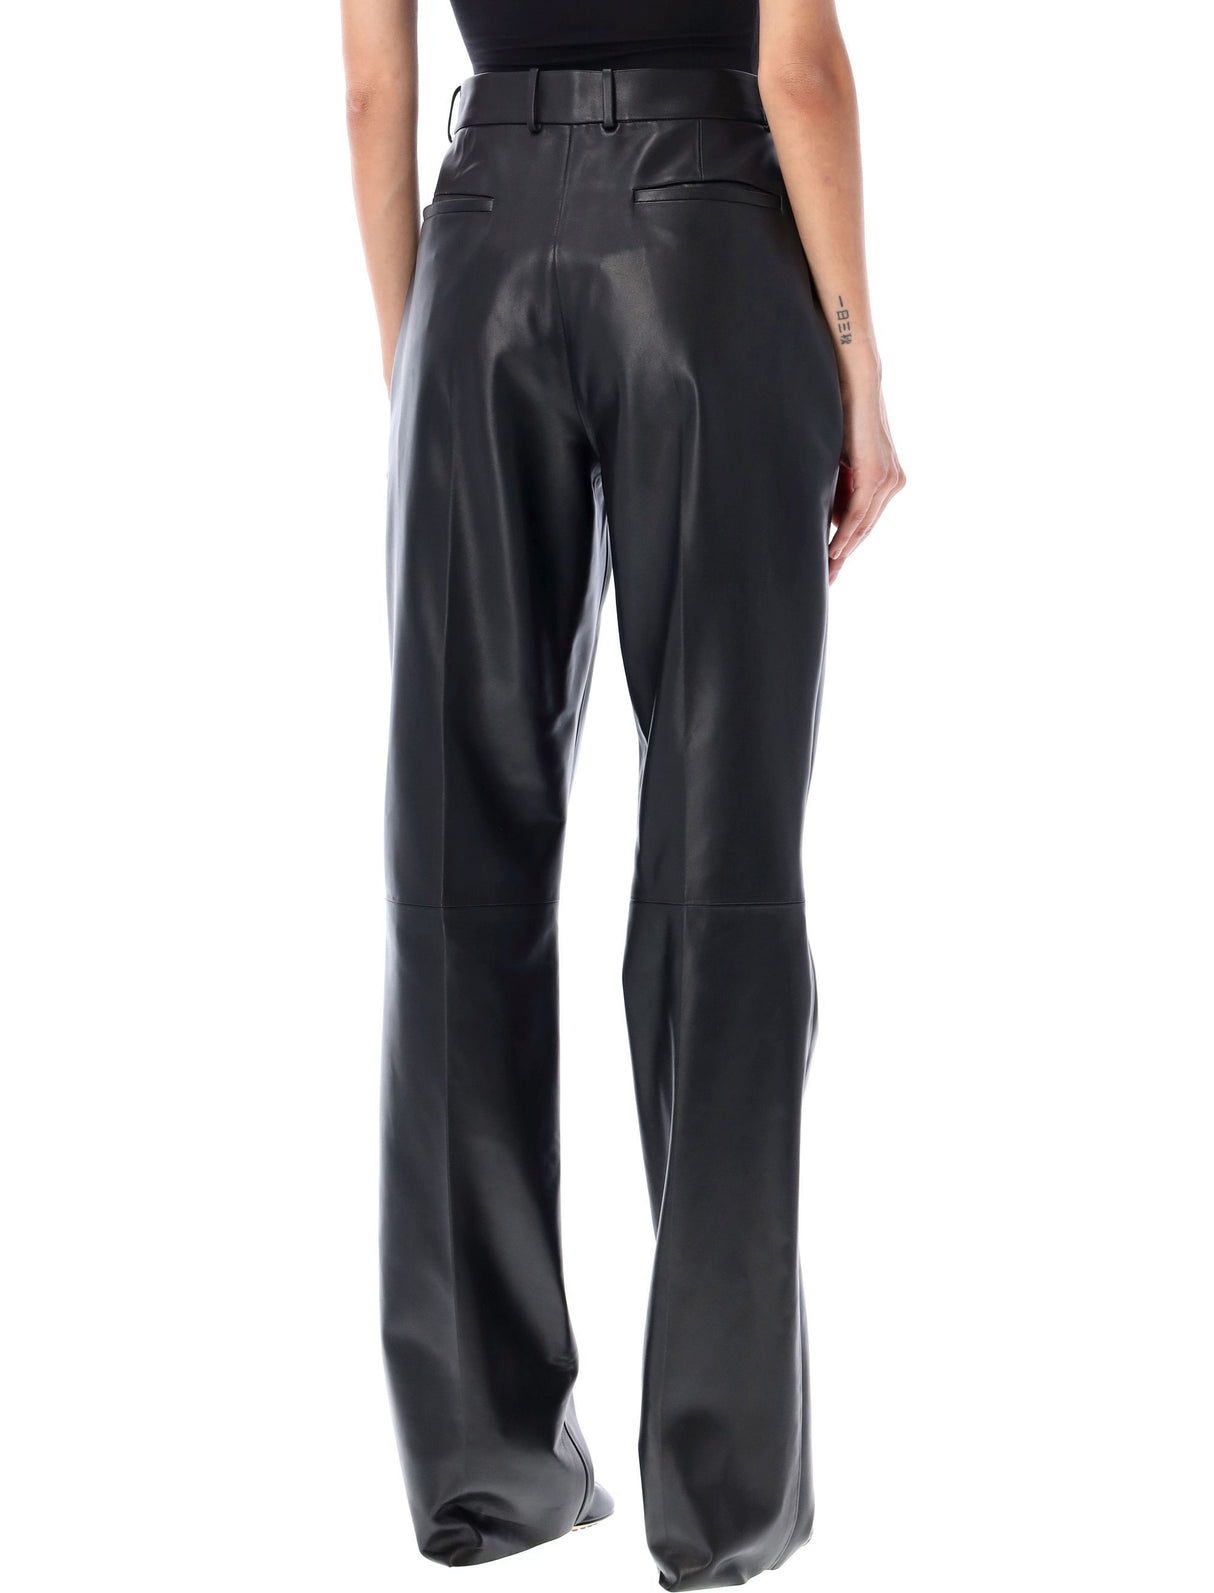 FERRAGAMO Genuine Leather Pants for Women by a Top Luxury Designer